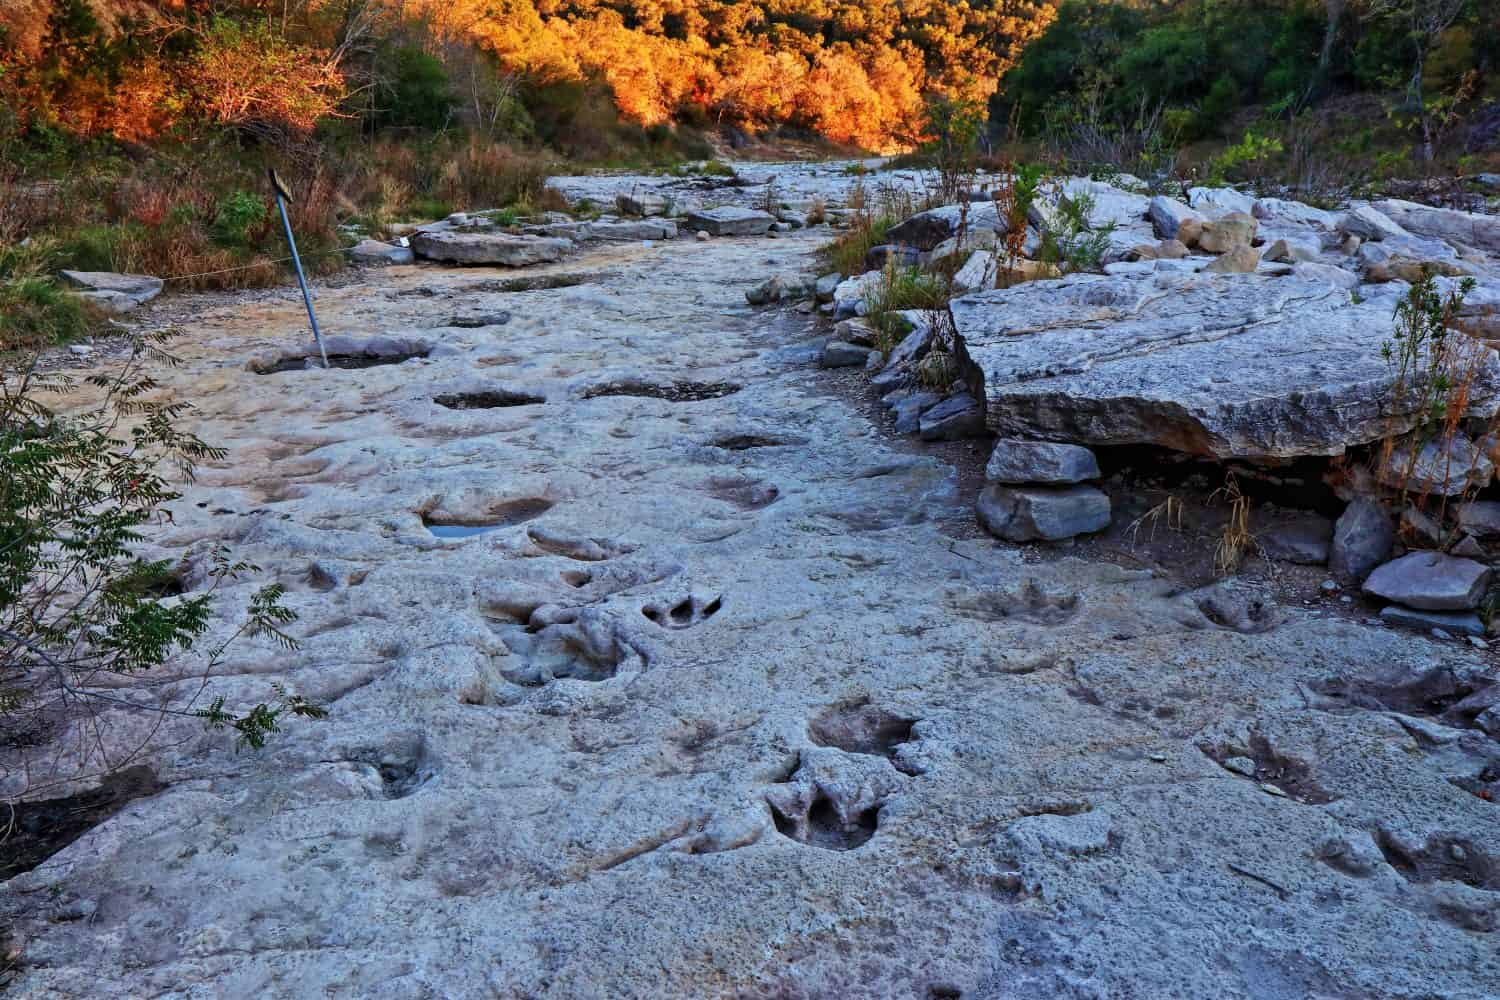 Fossilized dinosaur tracks in the dry Paluxy Riverbed at Dinosaur Valley State Park in Glen Rose, Texas